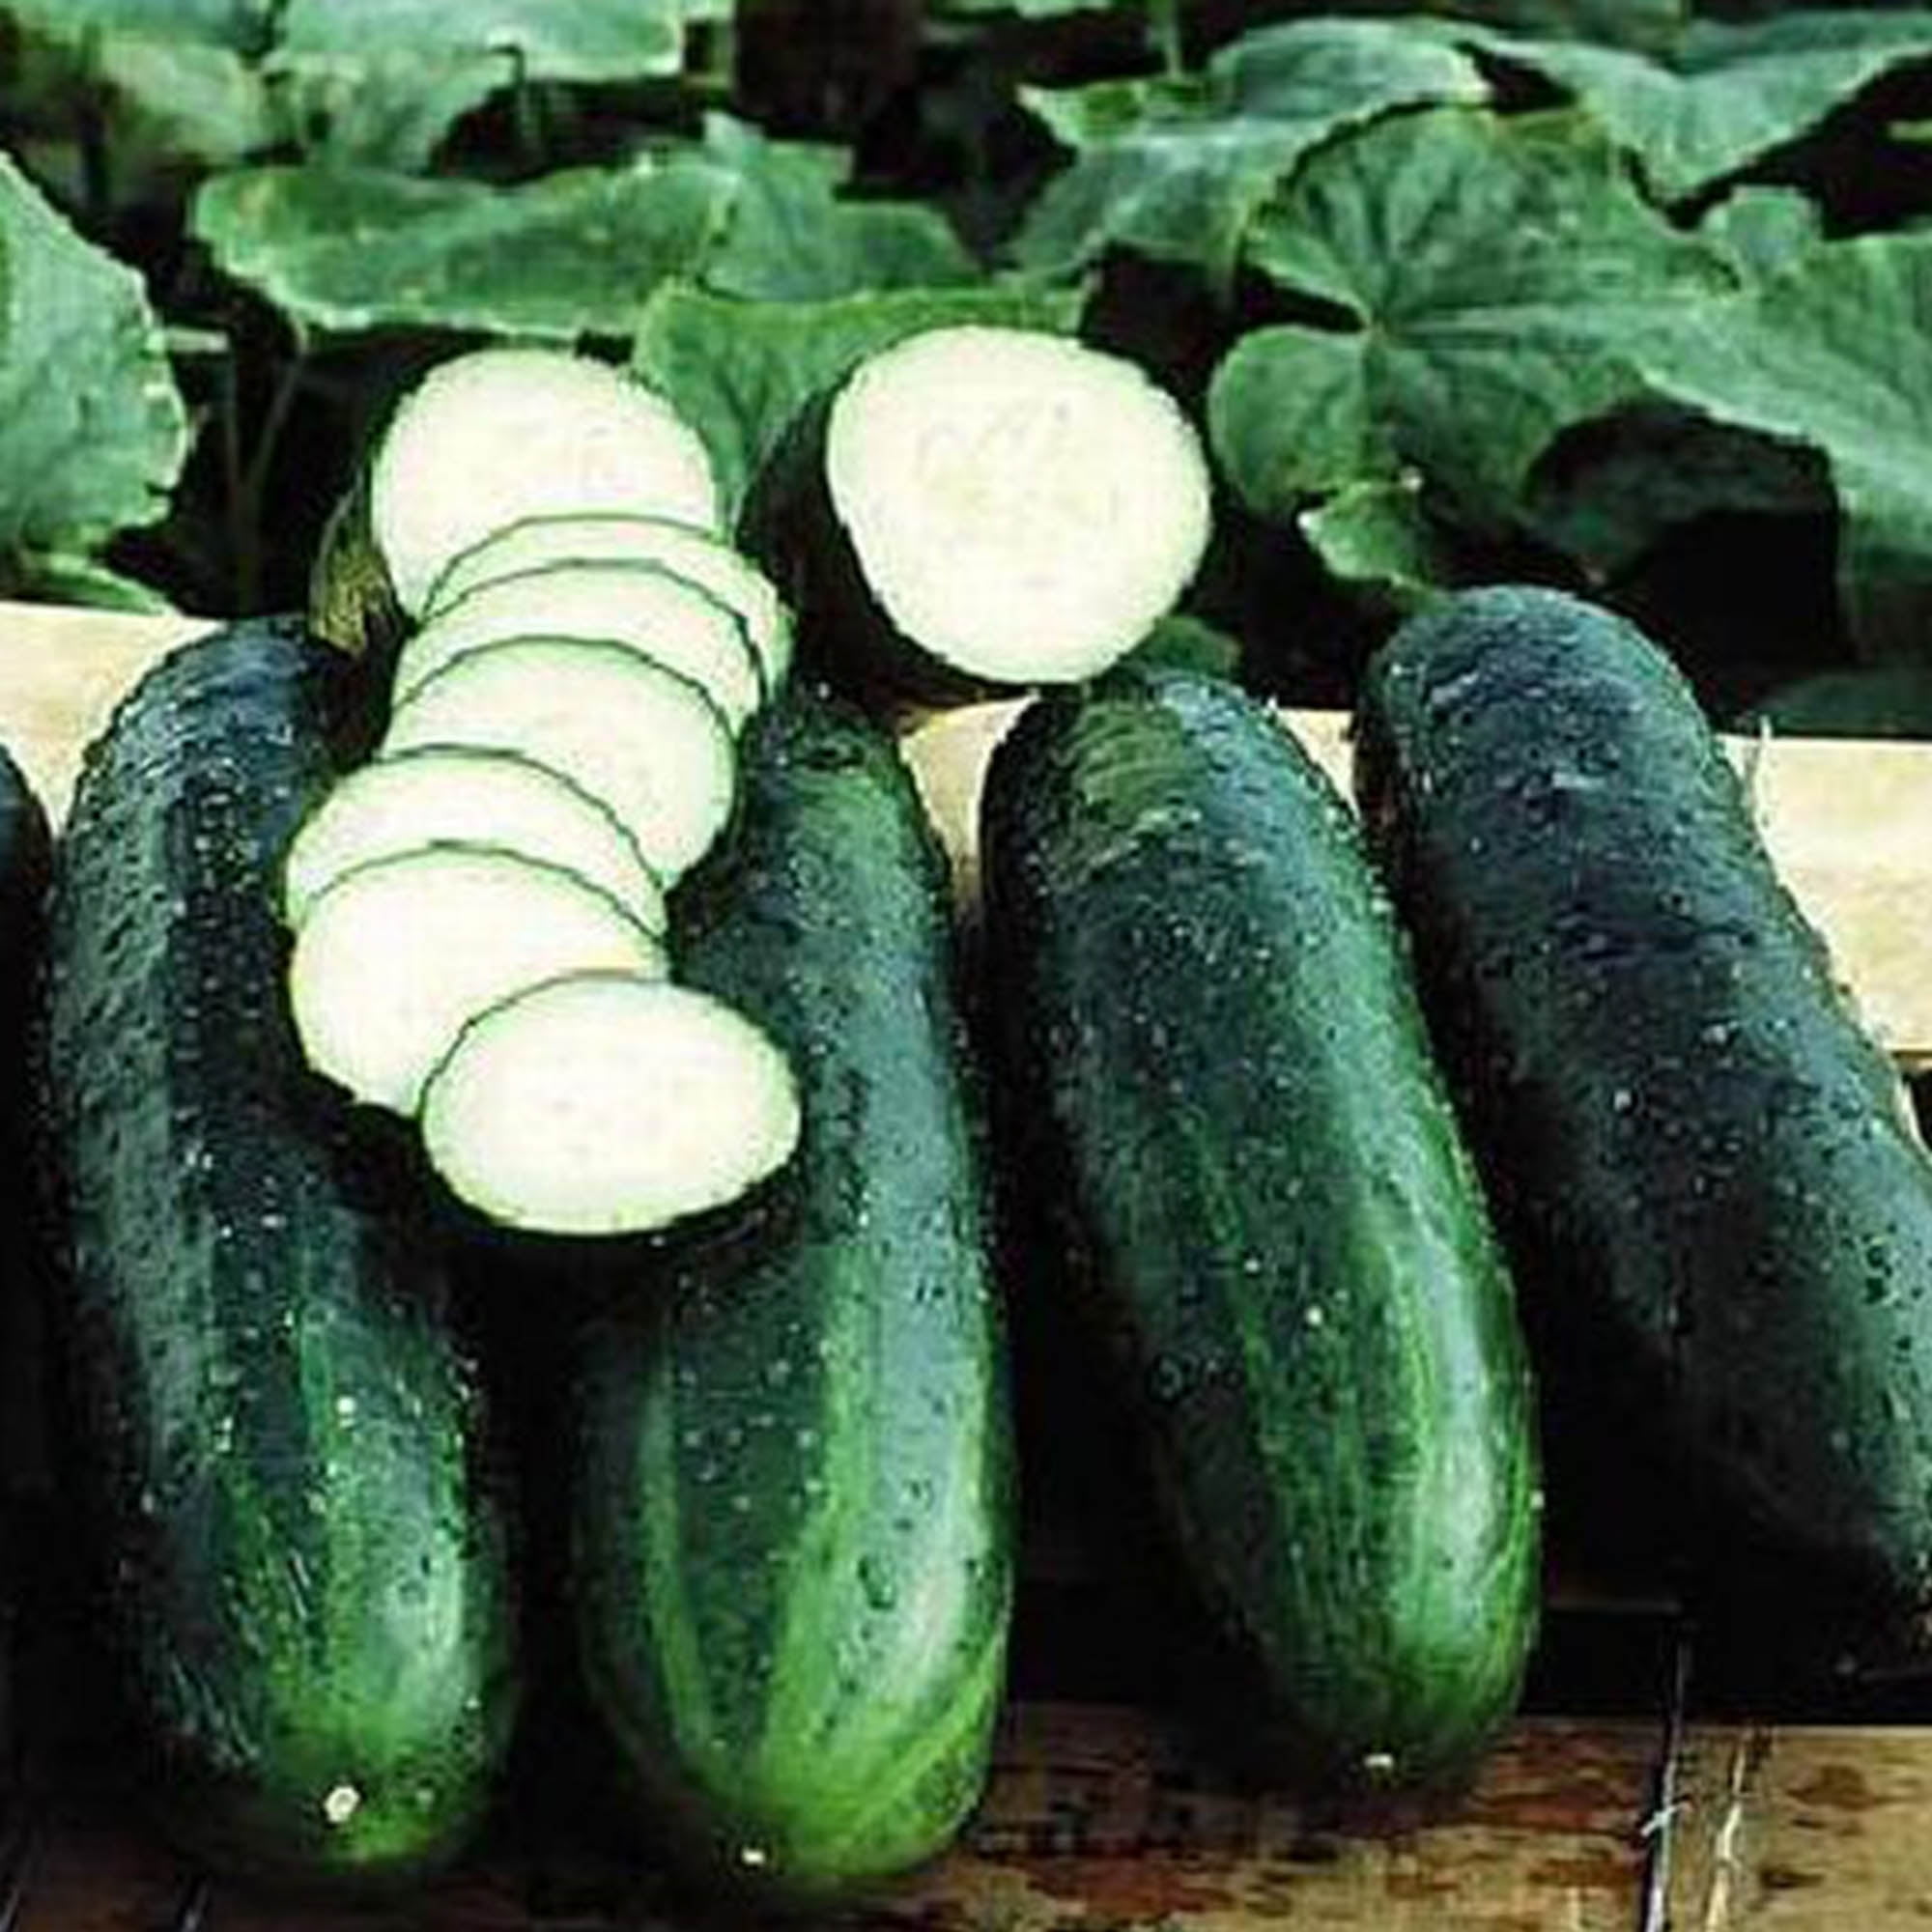 Details about   STRAIGHT EIGHT CUCUMBER SEEDS HEIRLOOM VEGETABLE 1 G ~30 SEEDS NON-GMO